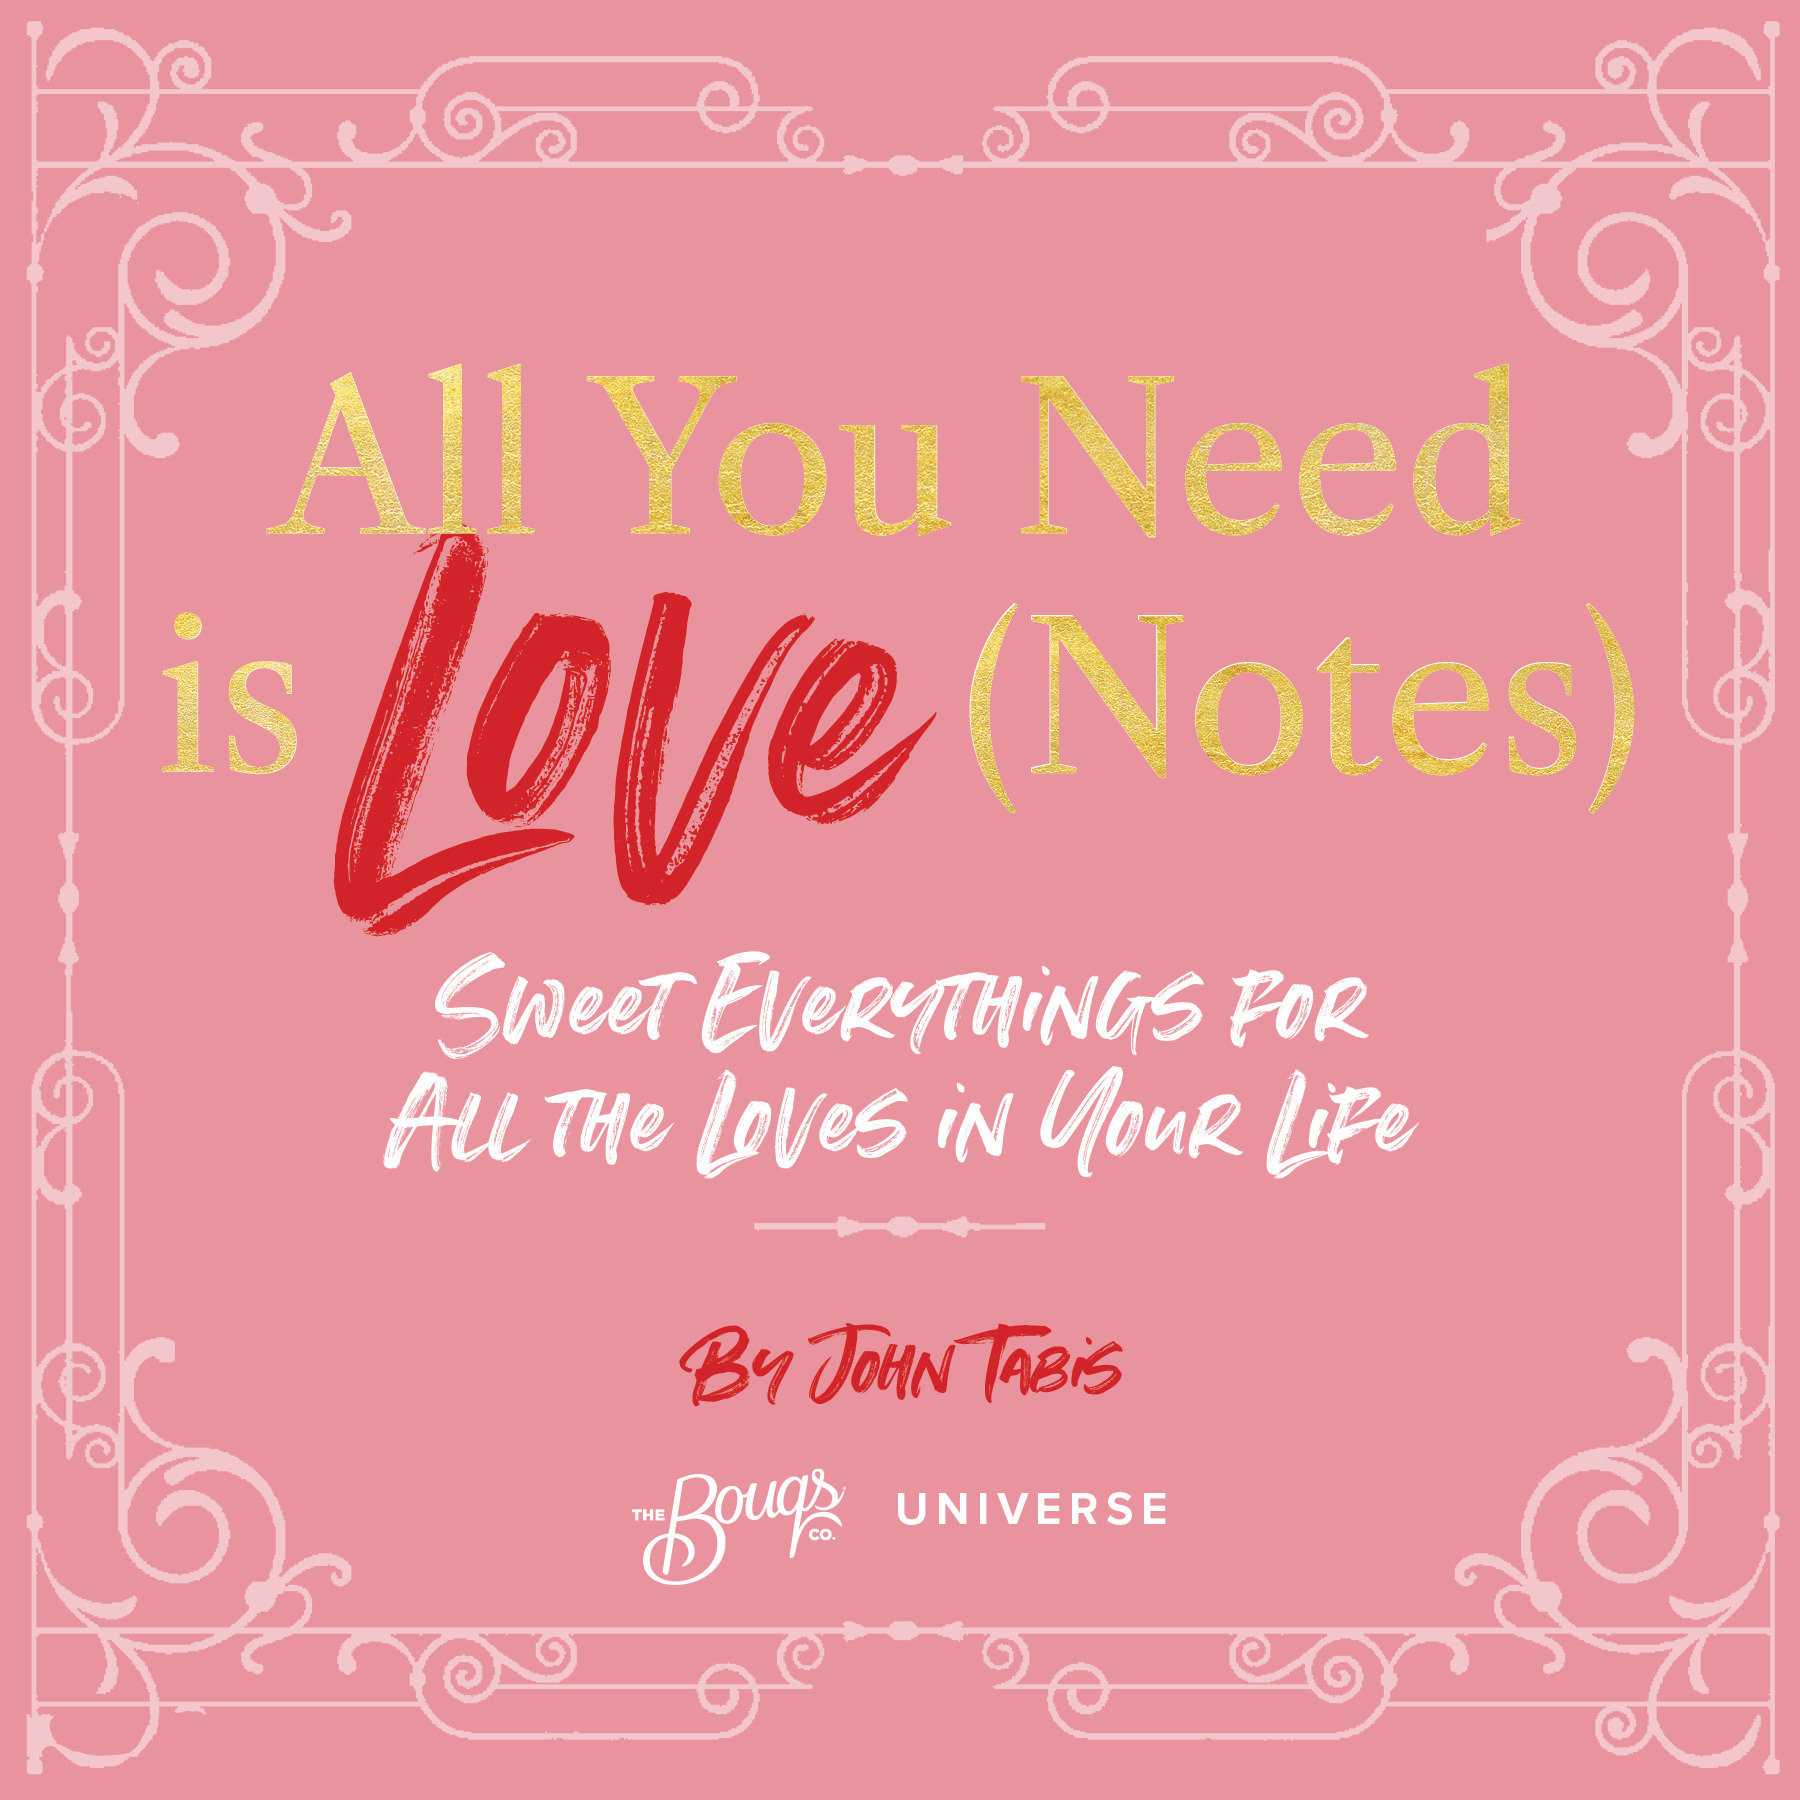 All You Need Is Love (Notes) (Hardcover Book)